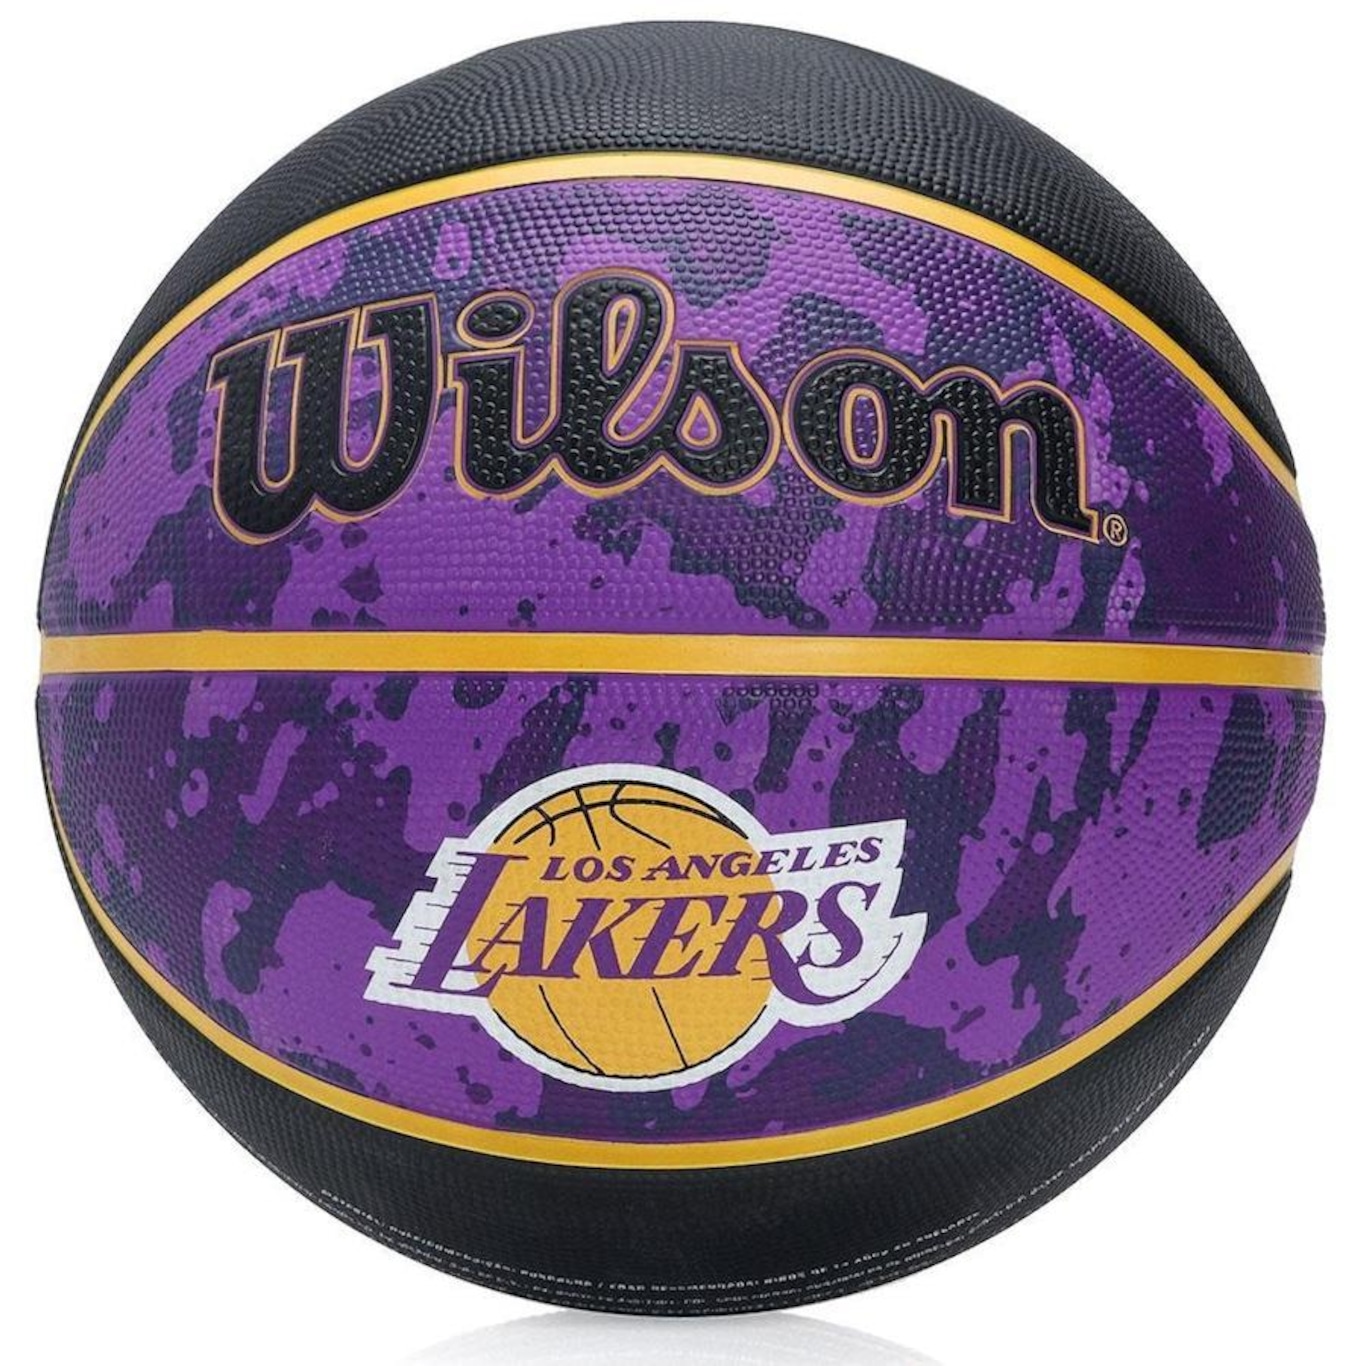 Bola De Basquete Wilson 75th Anniversary Authentic Ind/Out - Tam 7